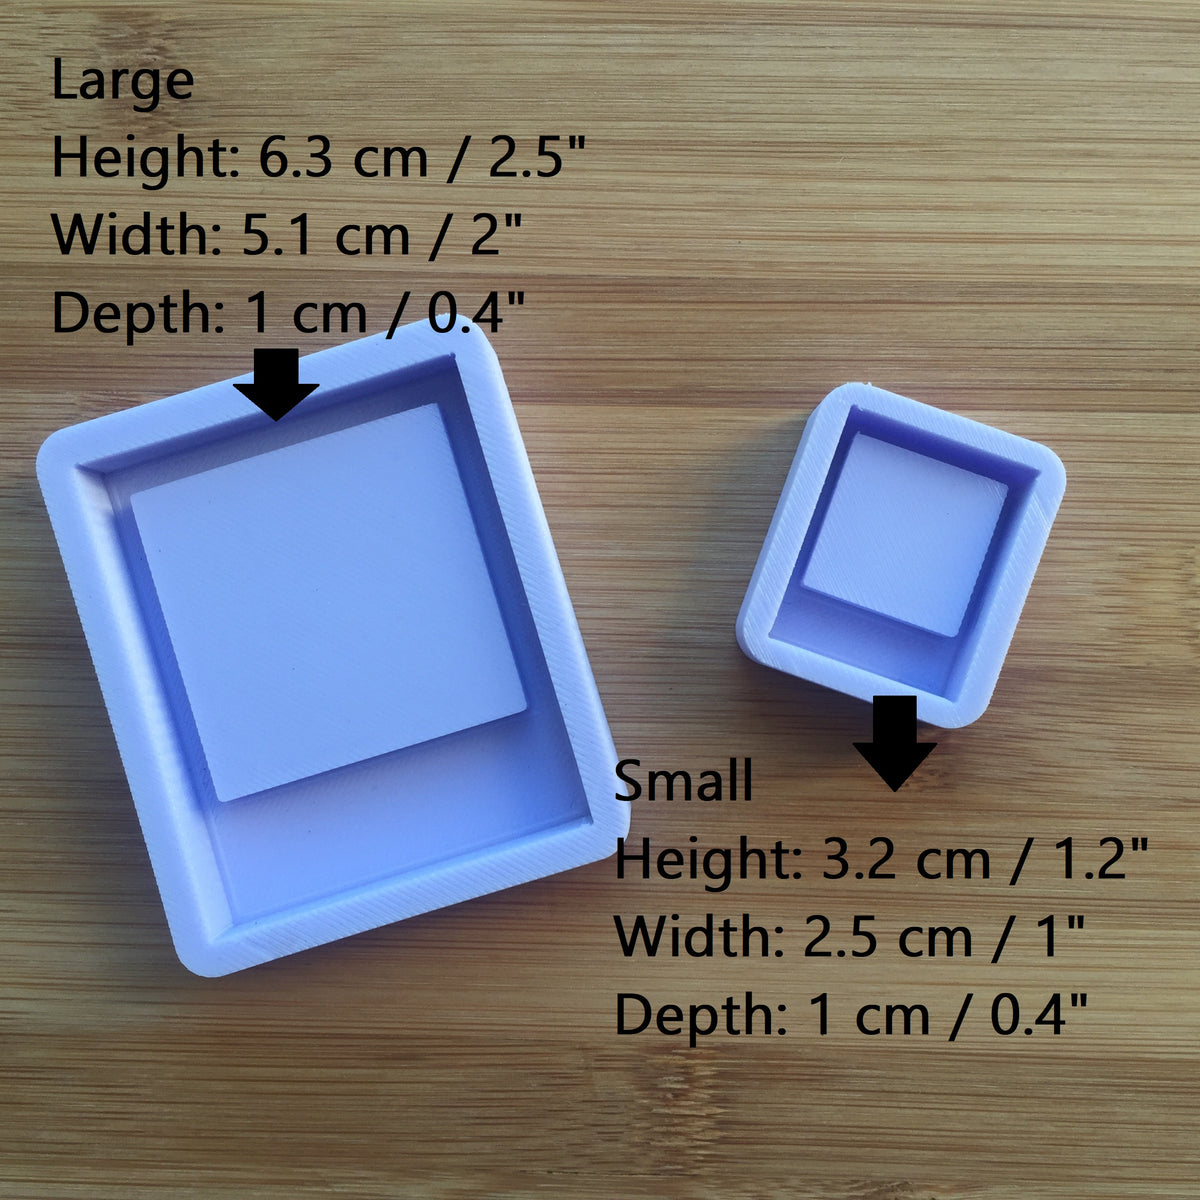 SILICONE MOLD - WIDE RECTANGLE